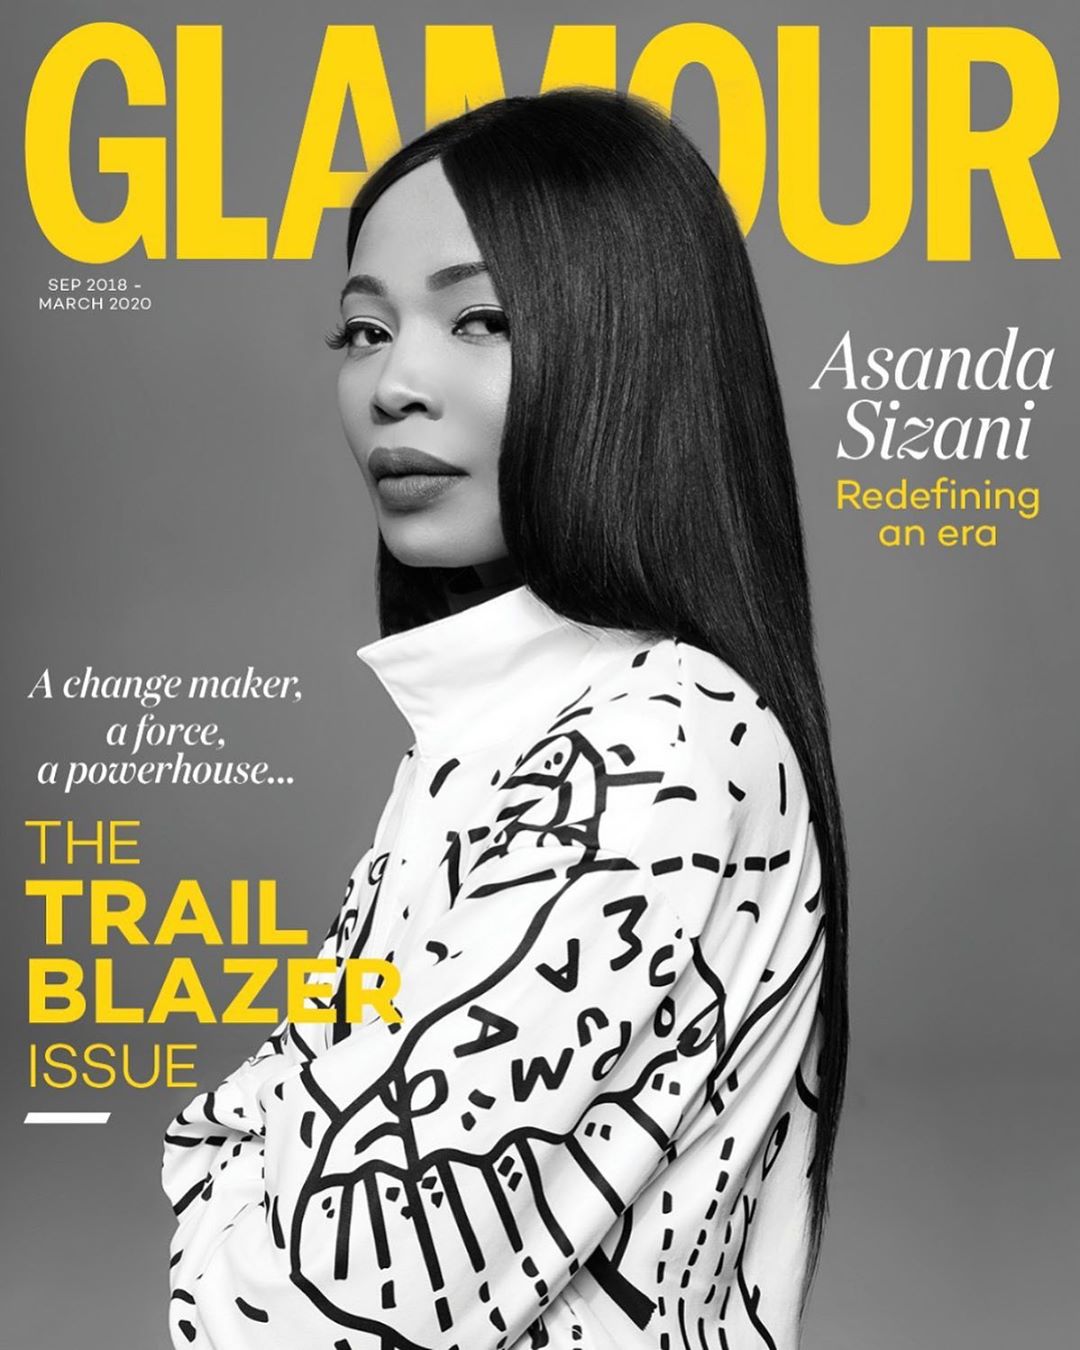 Just In Asanda Sizani To Exit Glamour South Africa After 2 Years